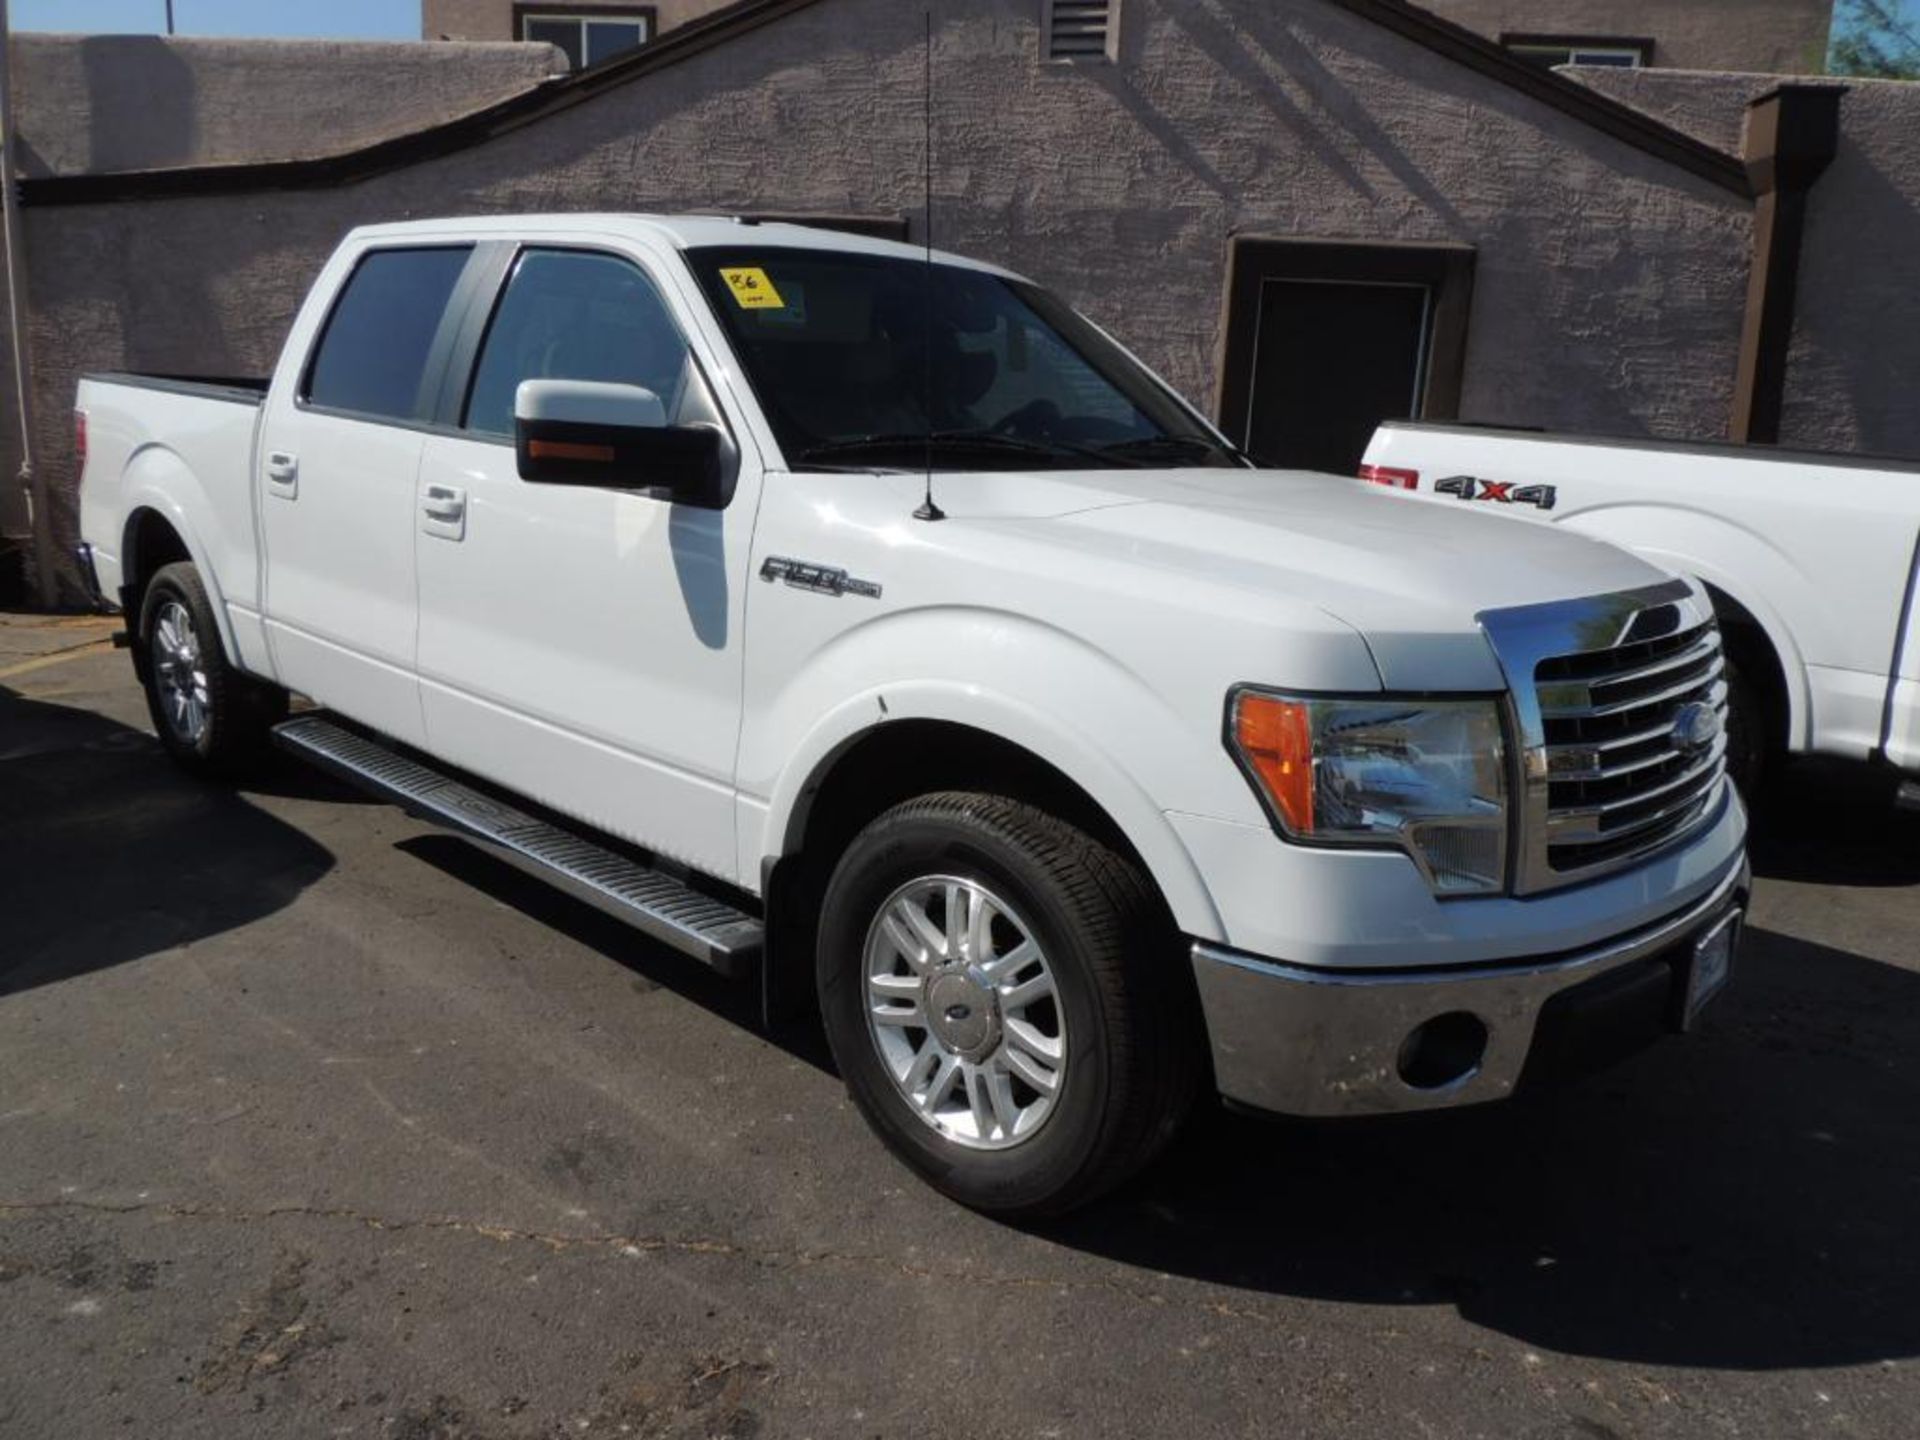 2014 Ford F150 Lariat Crew Cab Shortbed 4x2, VIN # 1FTFW1CF6EKE70611, 5.0 Ltr. Auto Trans, 106992 - Image 2 of 4